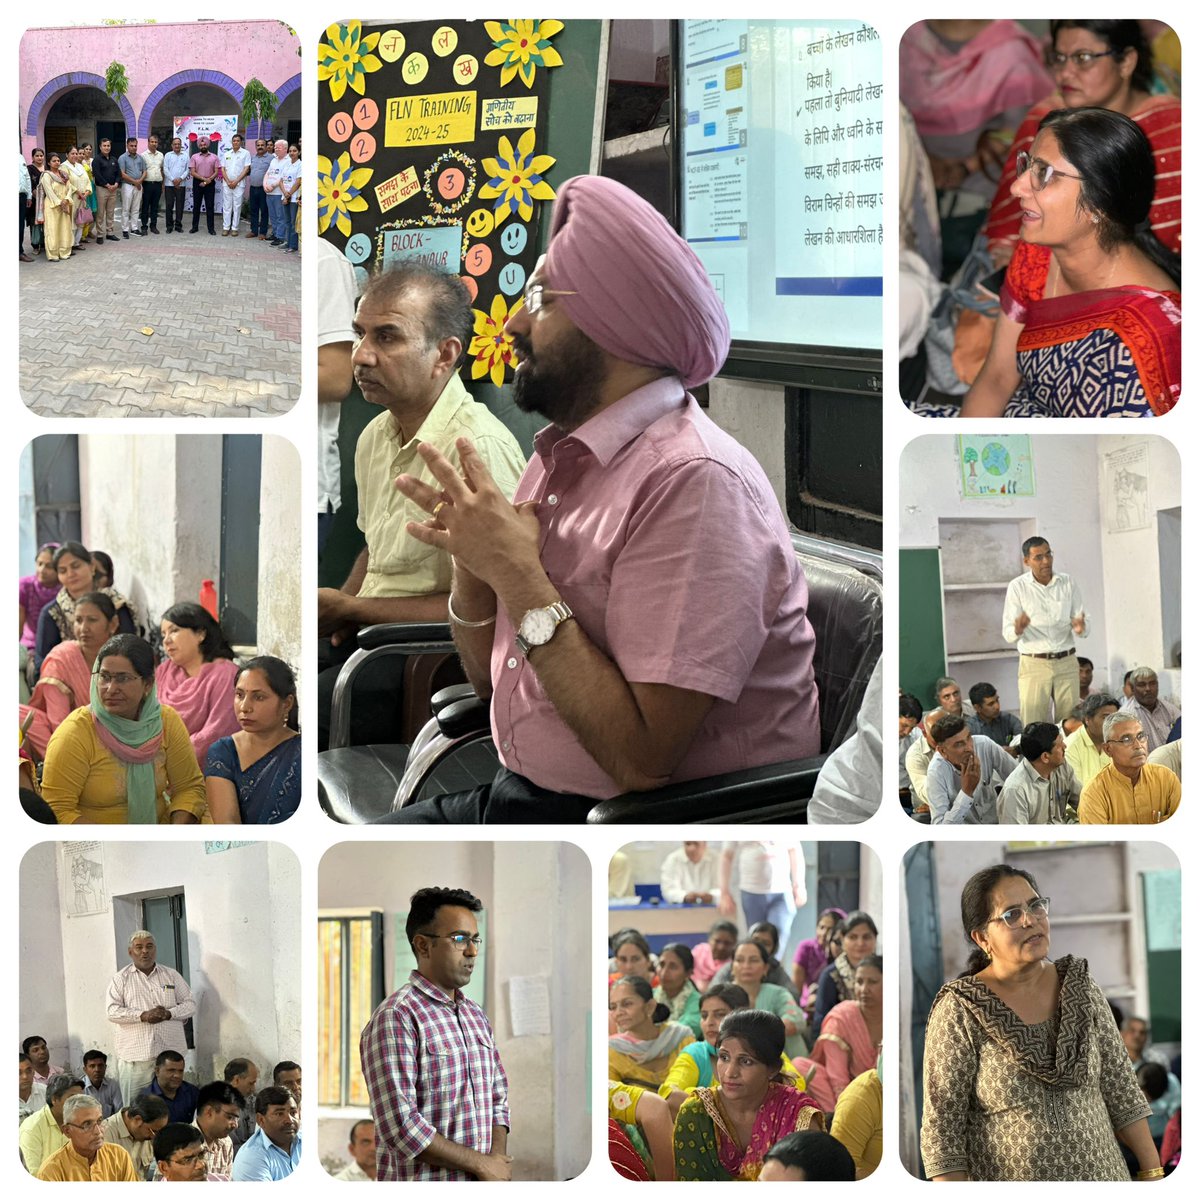 The Teacher Training Workshop in Sonepat District was graced by our esteemed DGEE, engaging with 80 teachers and Master Trainers, underscoring their vital role in the NIPUN Haryana Mission. @EduMinOfIndia #NIPUNHaryanaMission #TeacherTraining